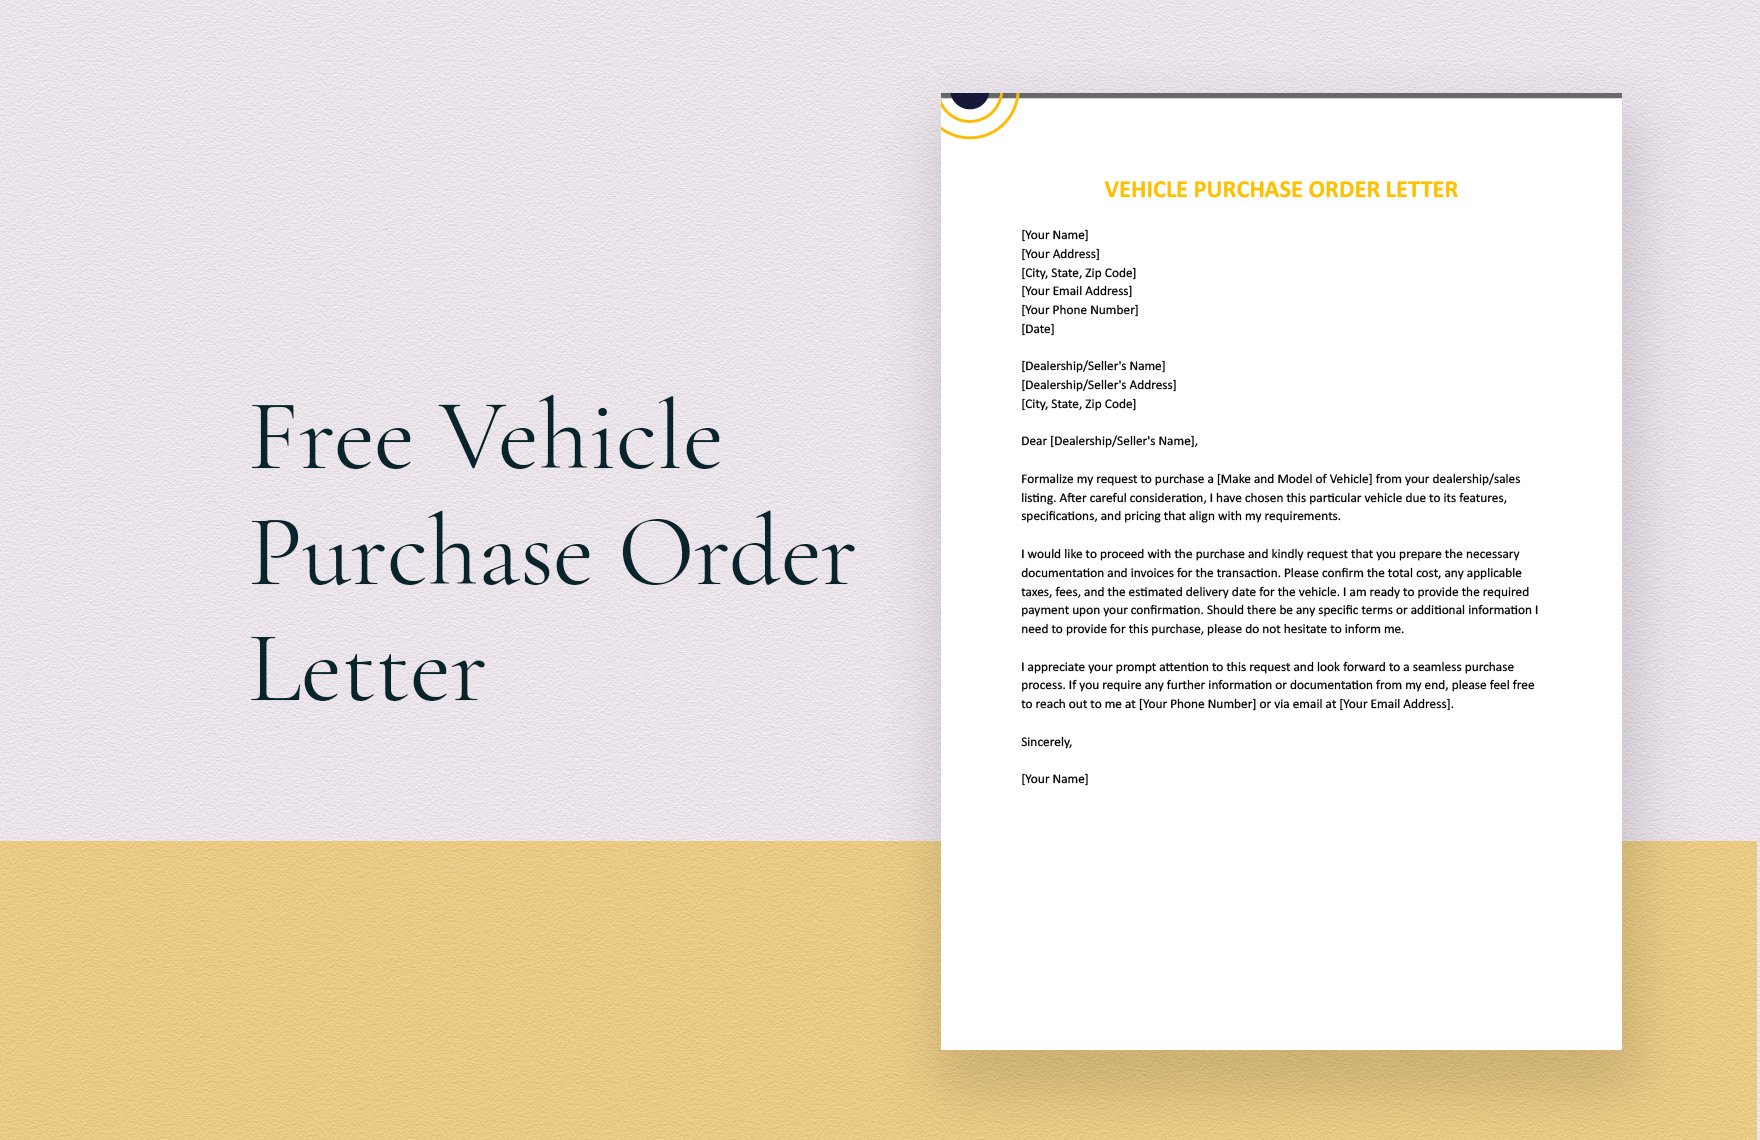 Vehicle Purchase Order Letter